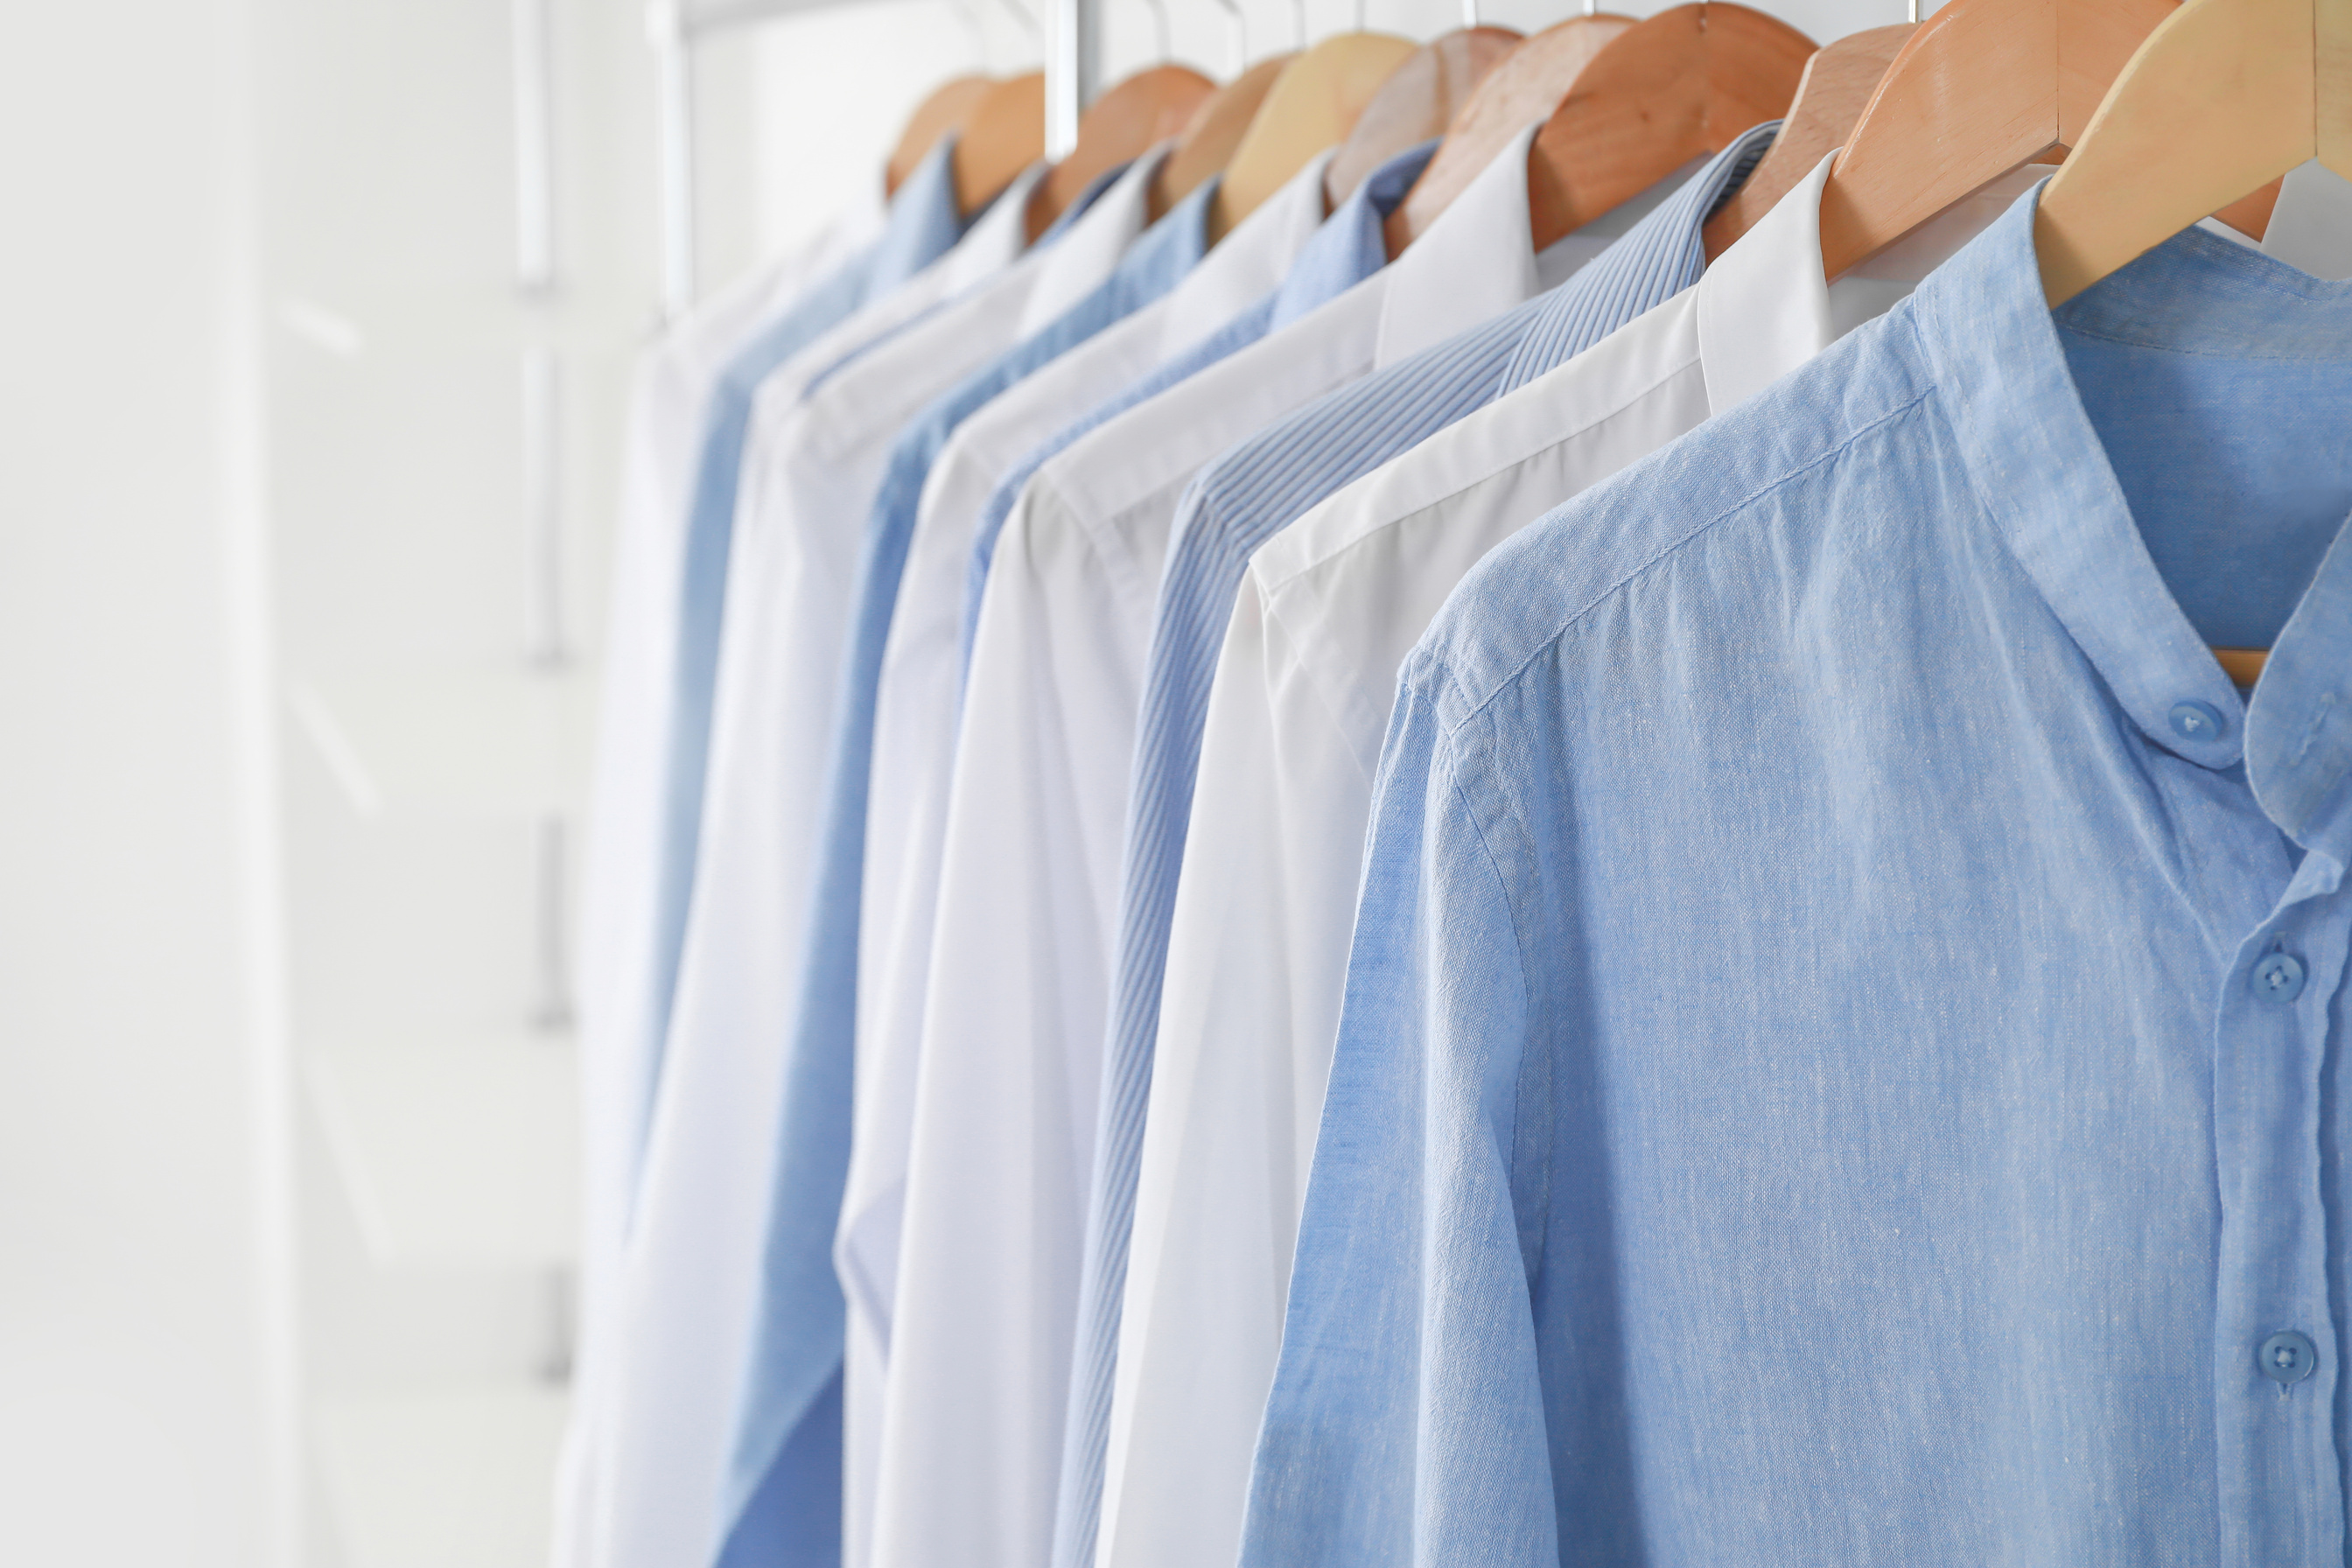 Rack with Clothes in Modern Dry-Cleaner's, Closeup